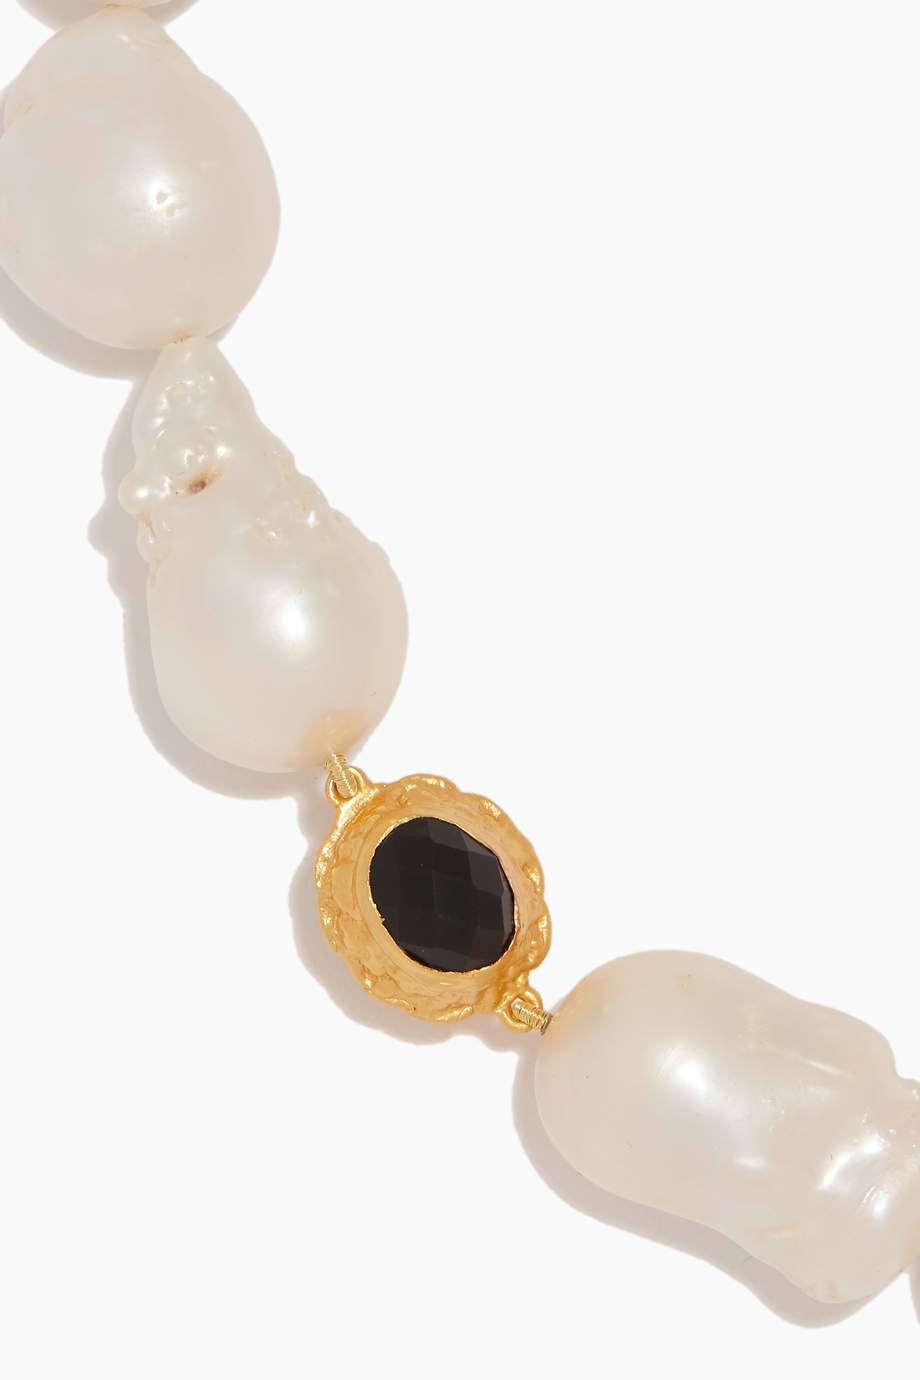 Shop VALÉRE White Dolce Vita II Pearl & Onyx Necklace for Women ...